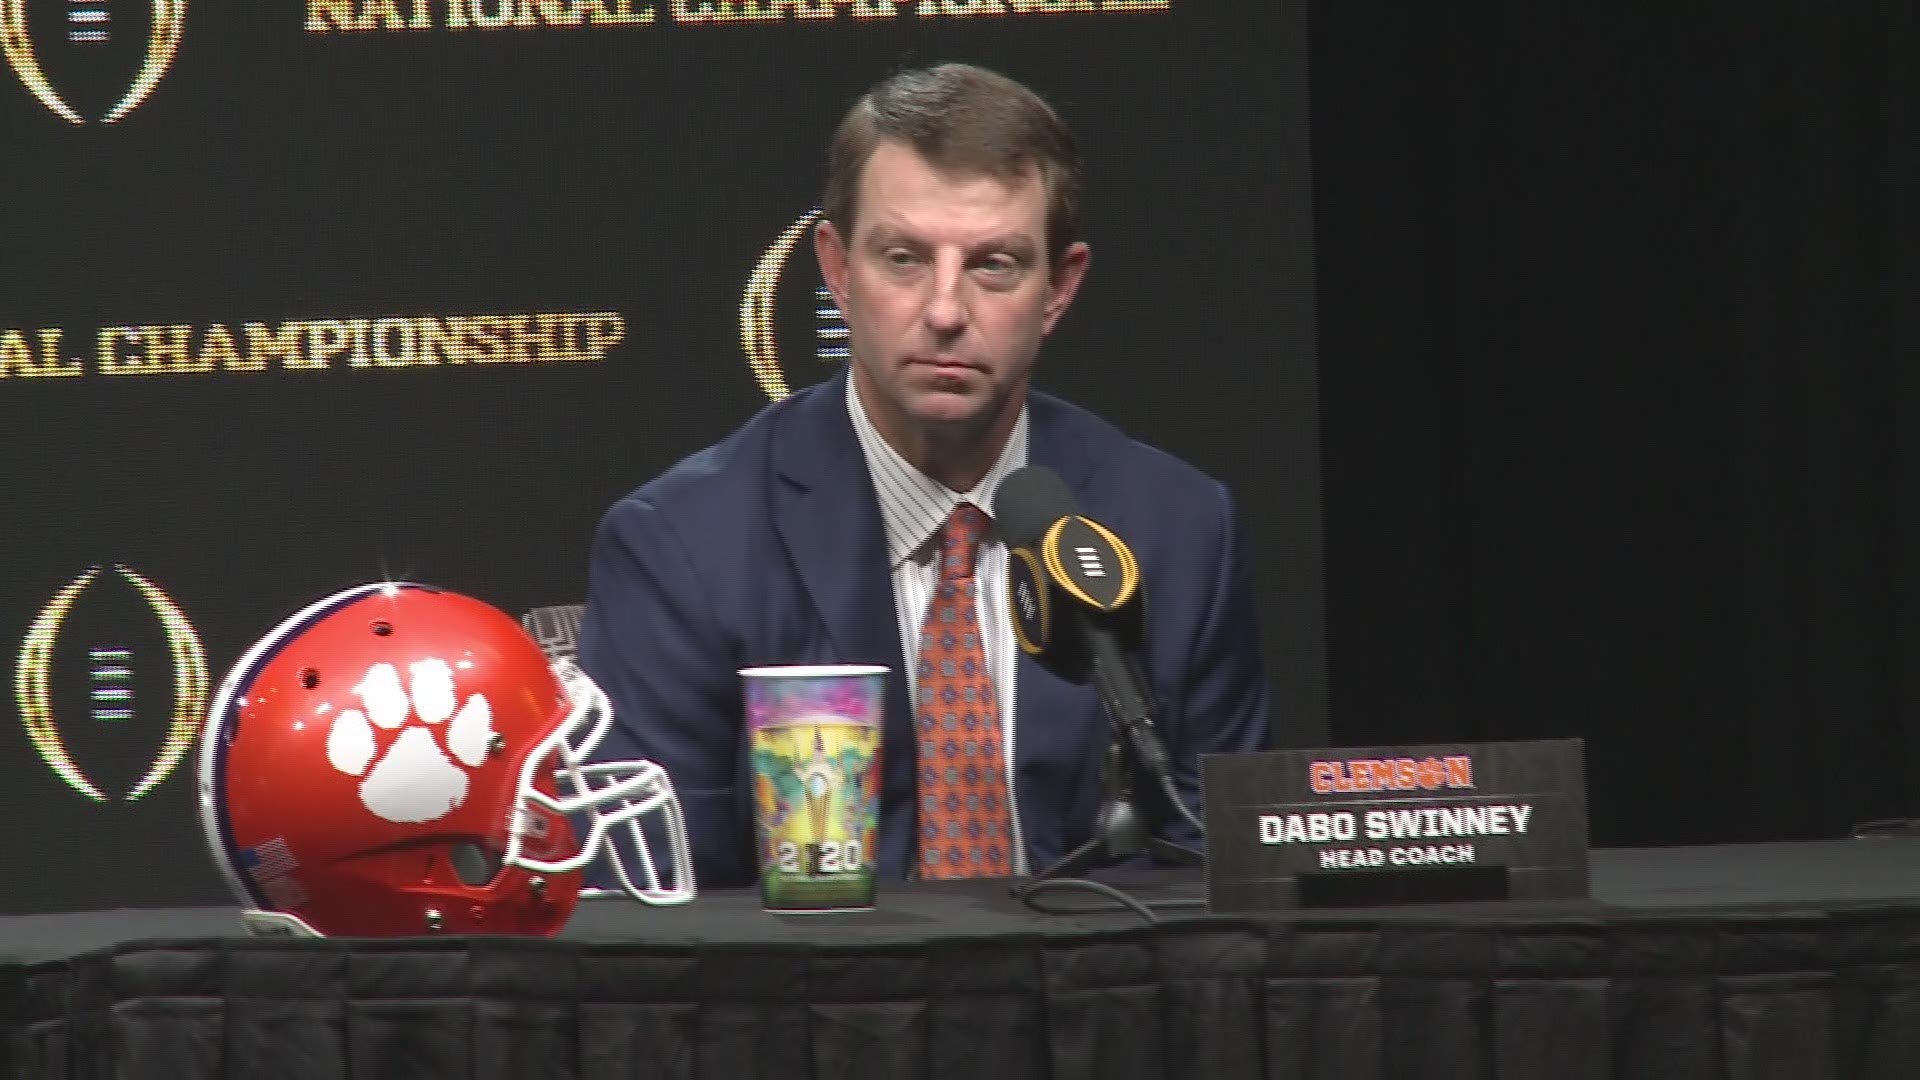 The final pre-game news conference saw Clemson head coach Dabo Swinney and LSU's Ed Orgeron share the stage in New Orleans.